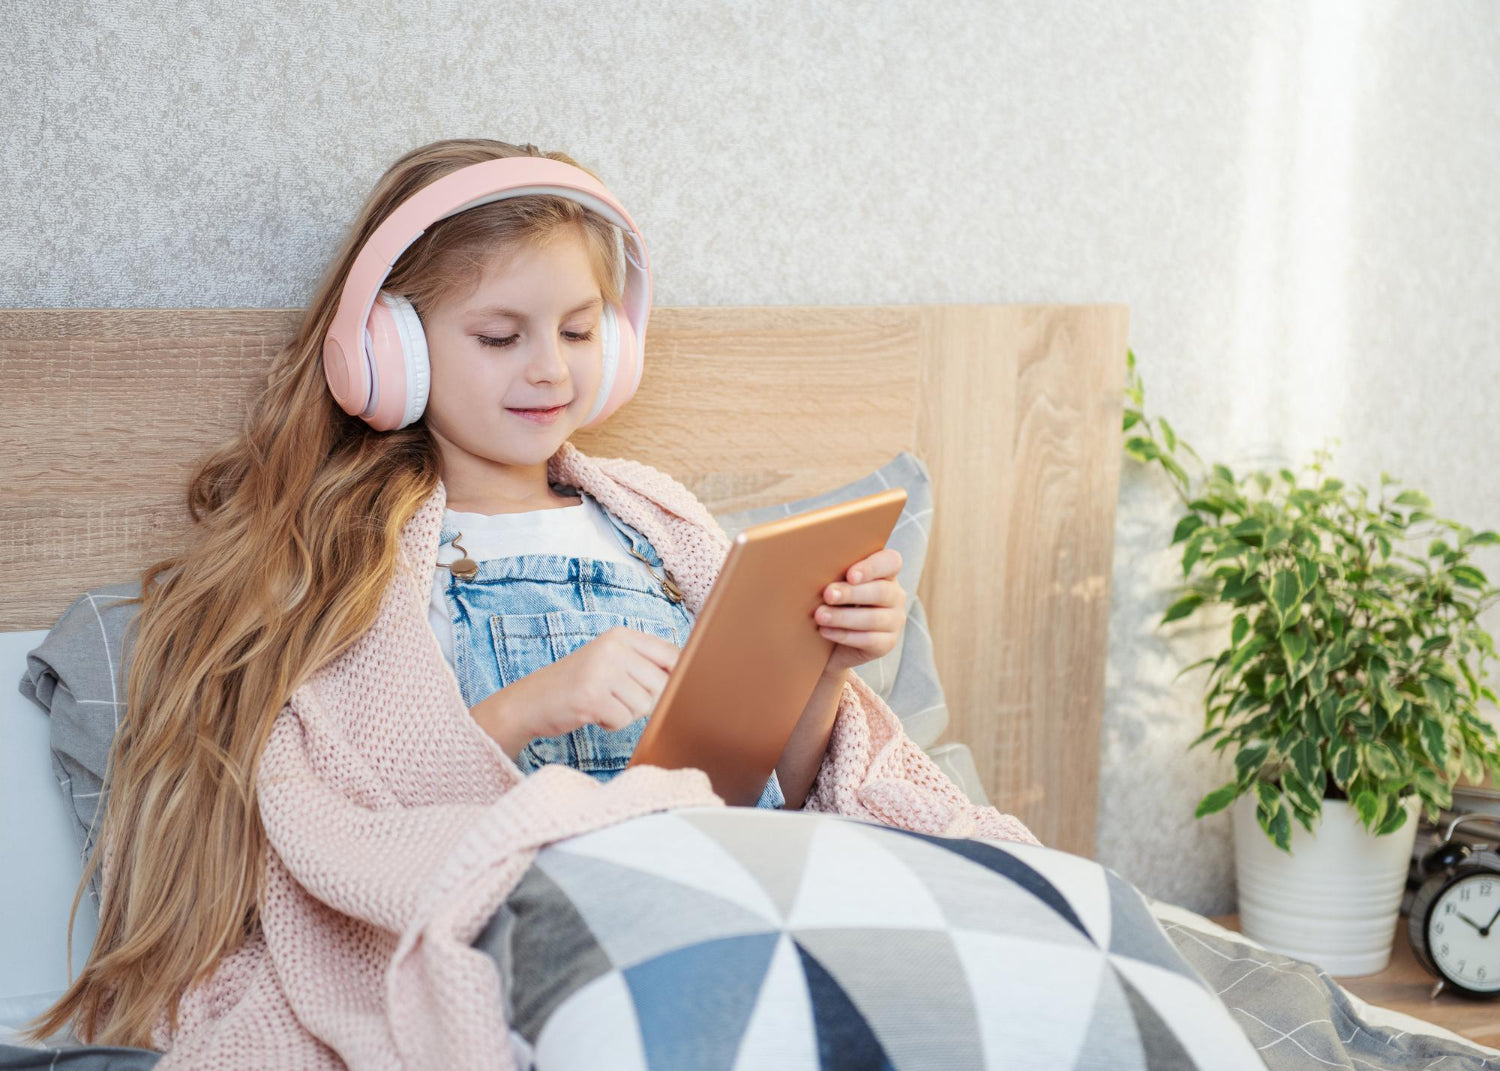 Girl with headphones on listening to an audio book whilst reading an ebook on a tablet